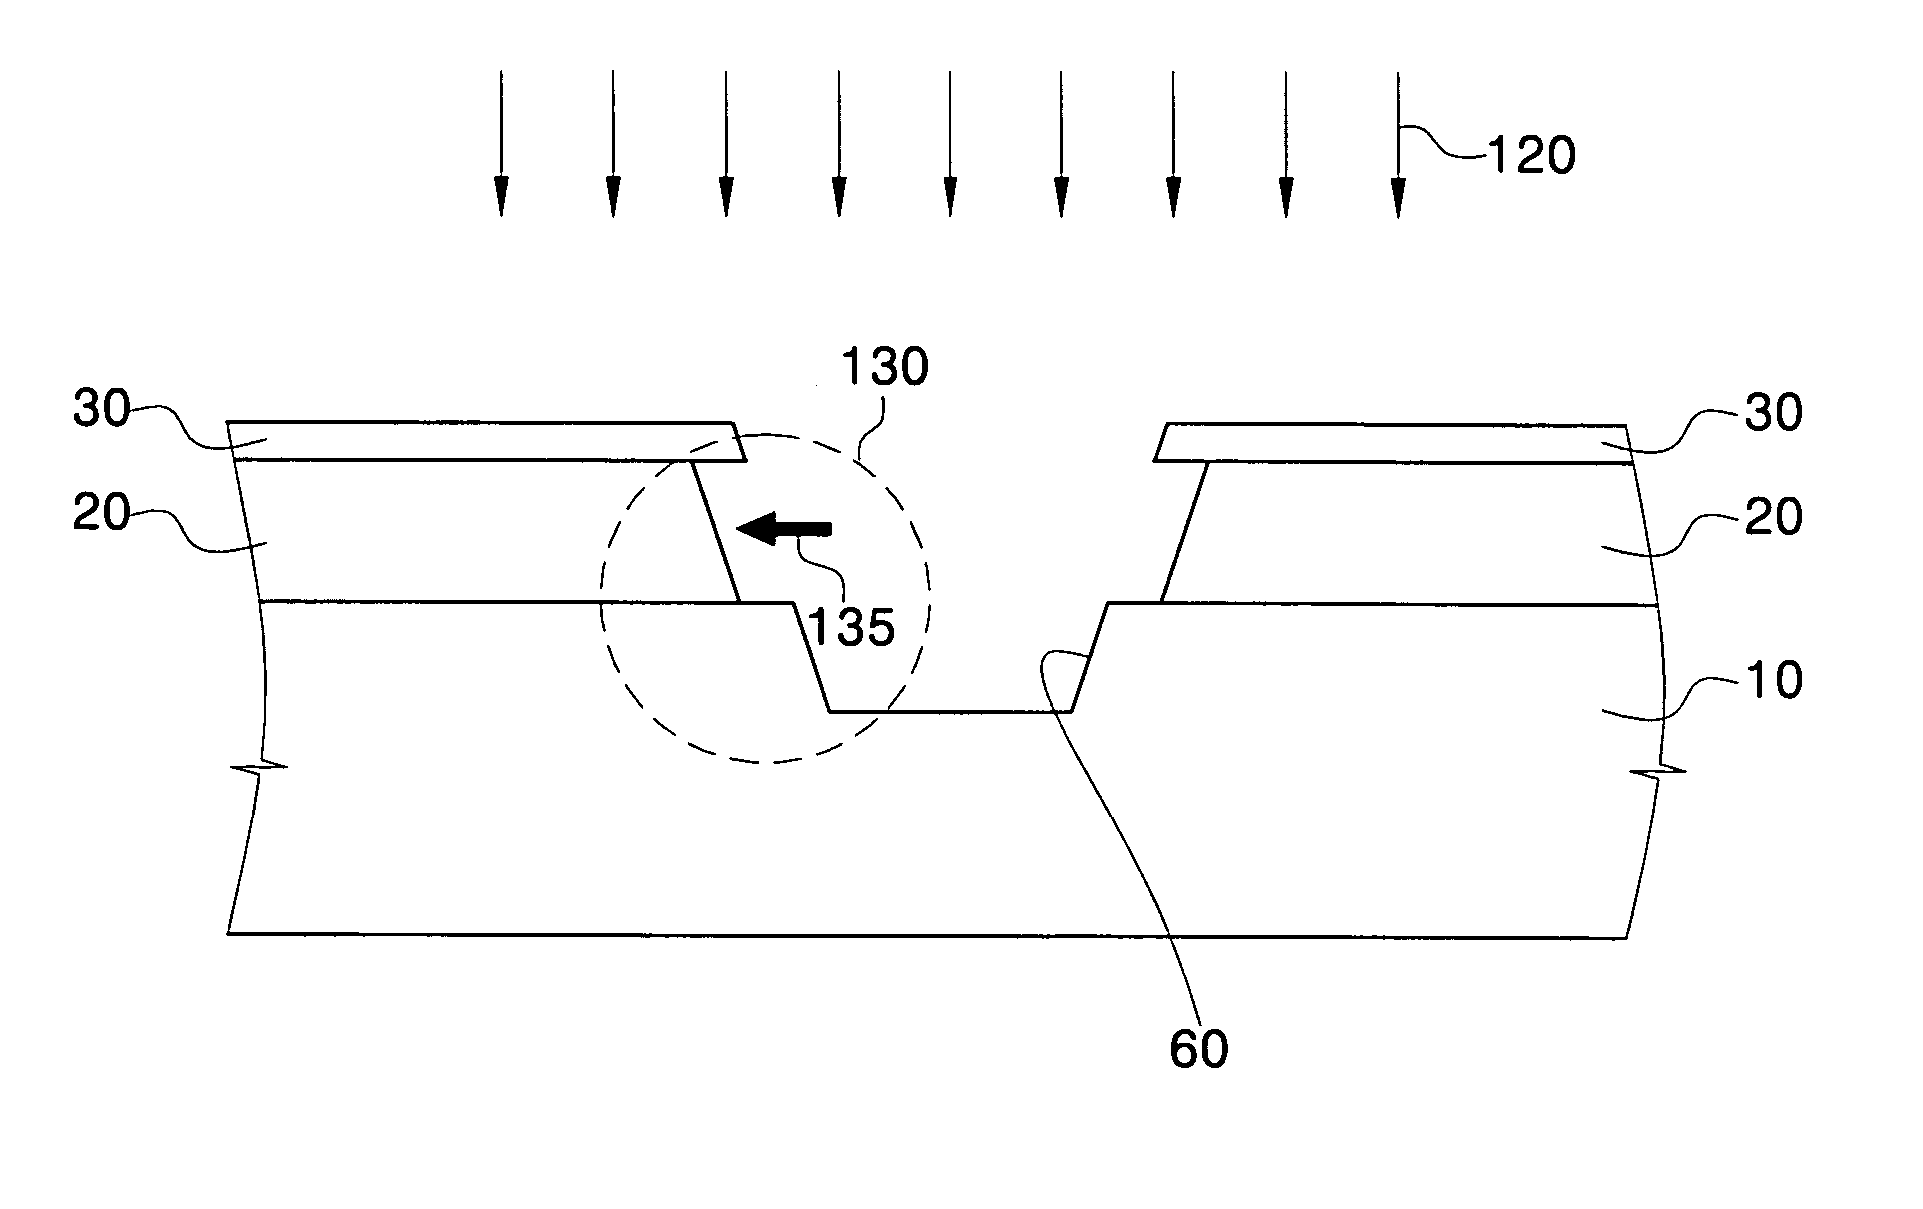 Methods of fabricating a semiconductor device using a dilute aqueous solution of an ammonia and peroxide mixture